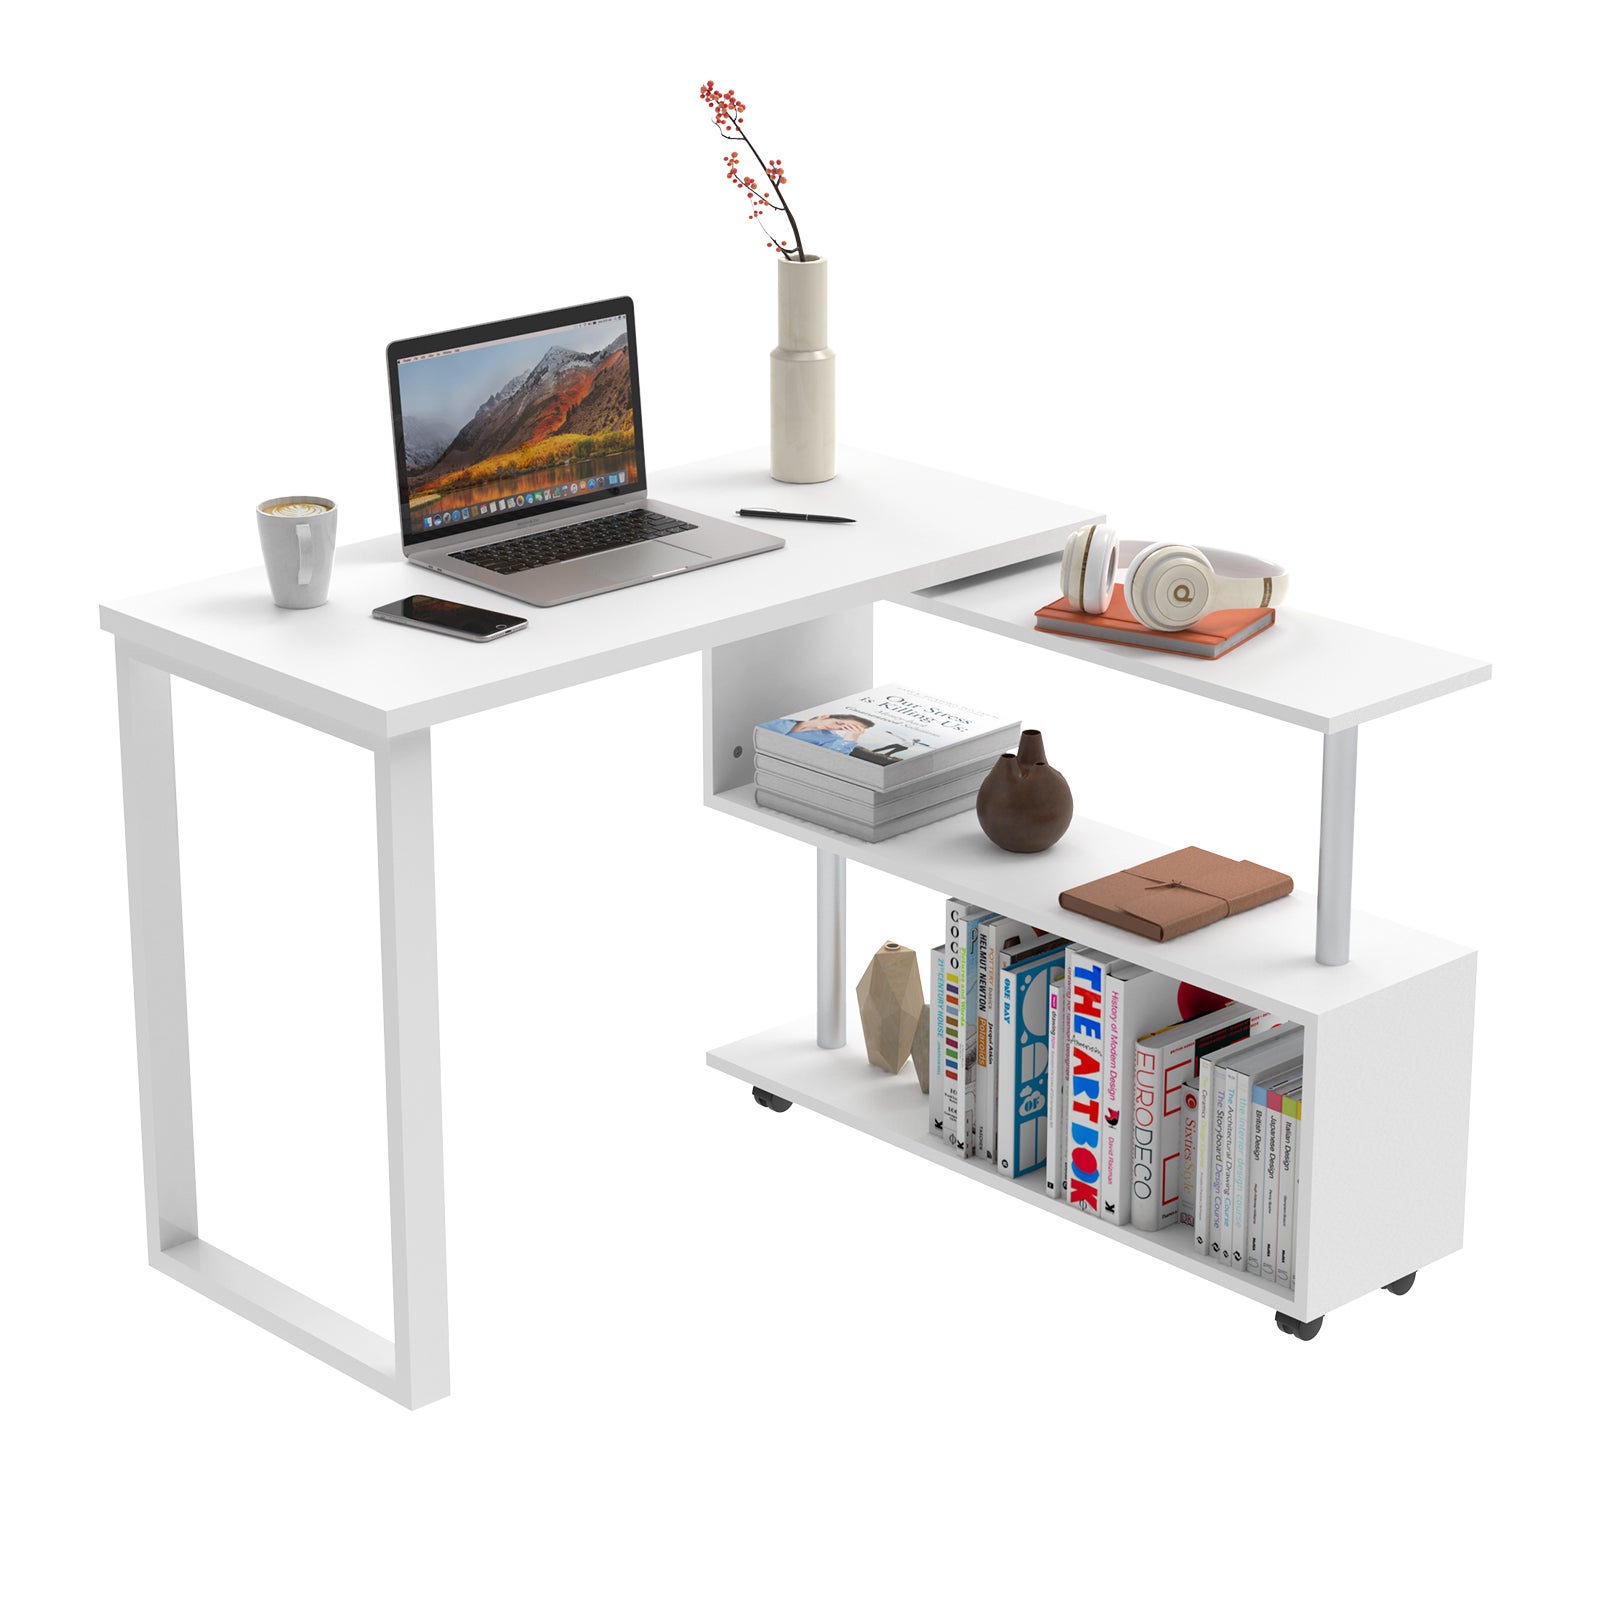 Advwin Computer Office Desk with Rotating Open Storage Shelf Corner Study Table Workststion White